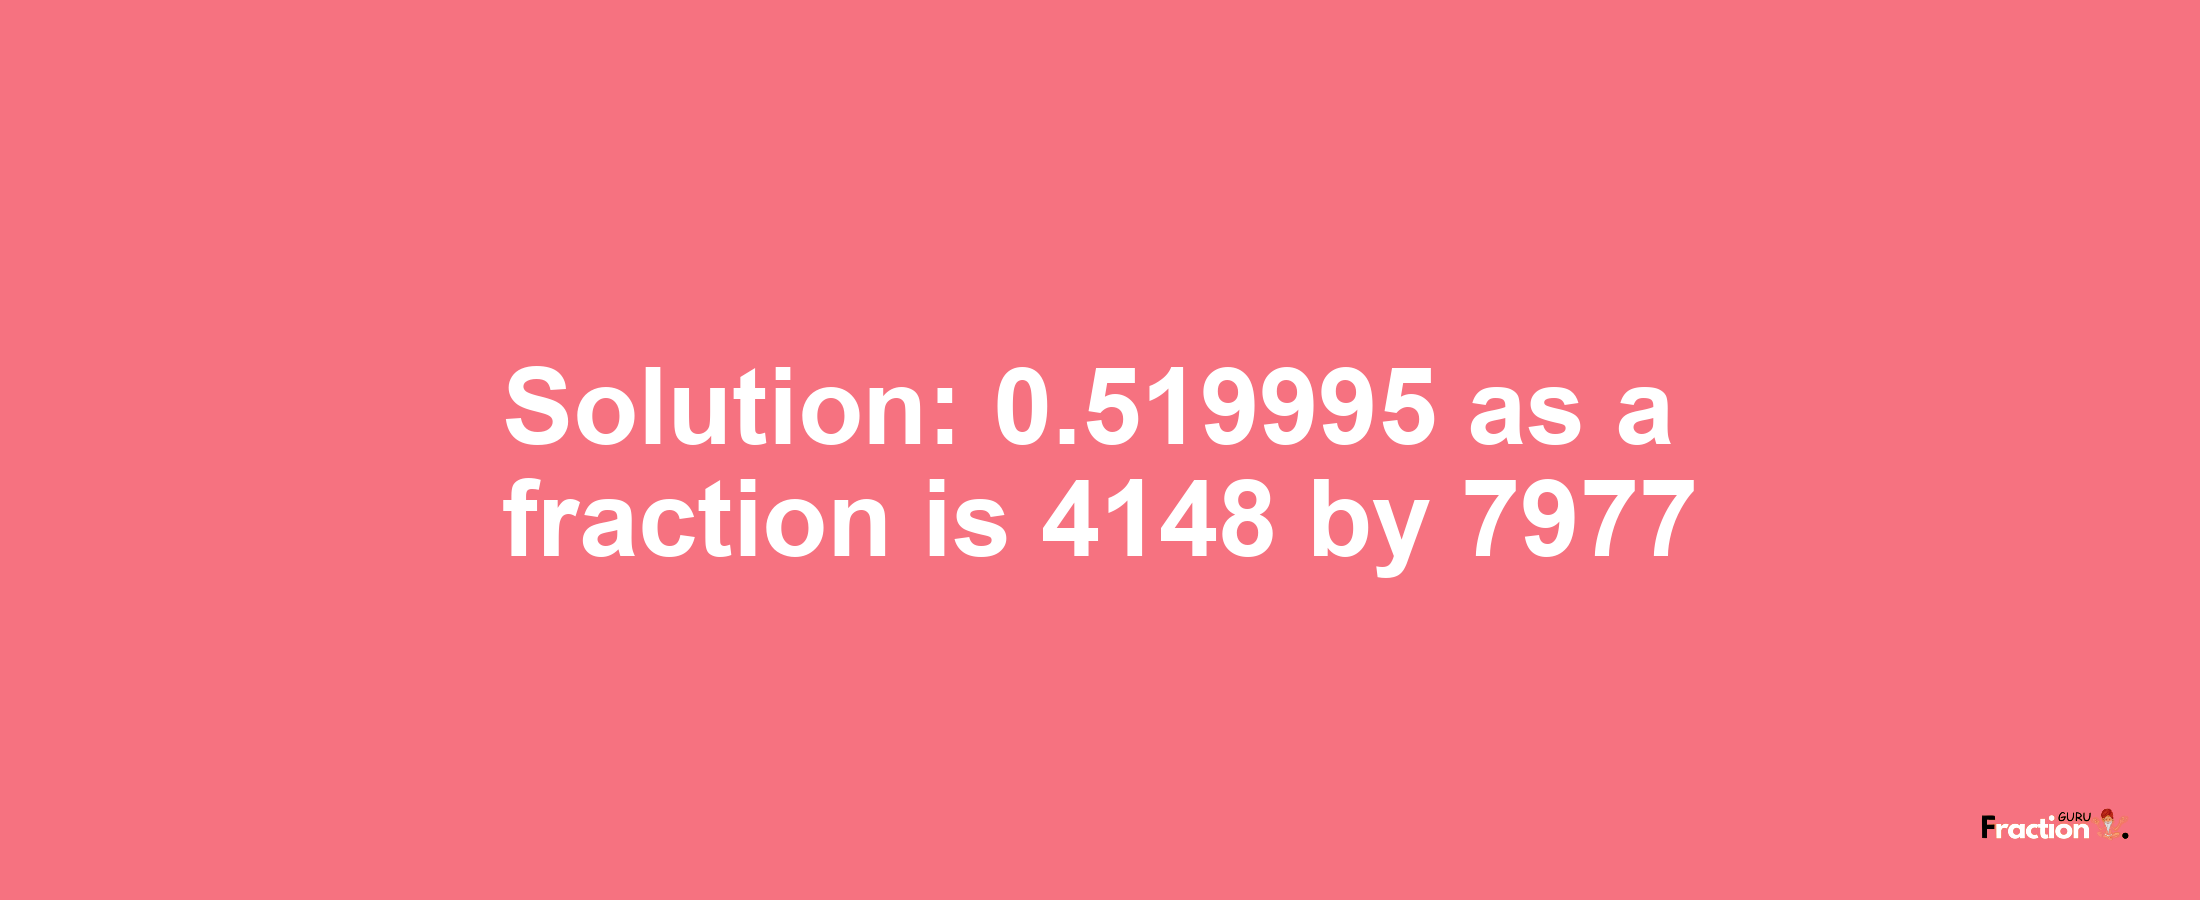 Solution:0.519995 as a fraction is 4148/7977